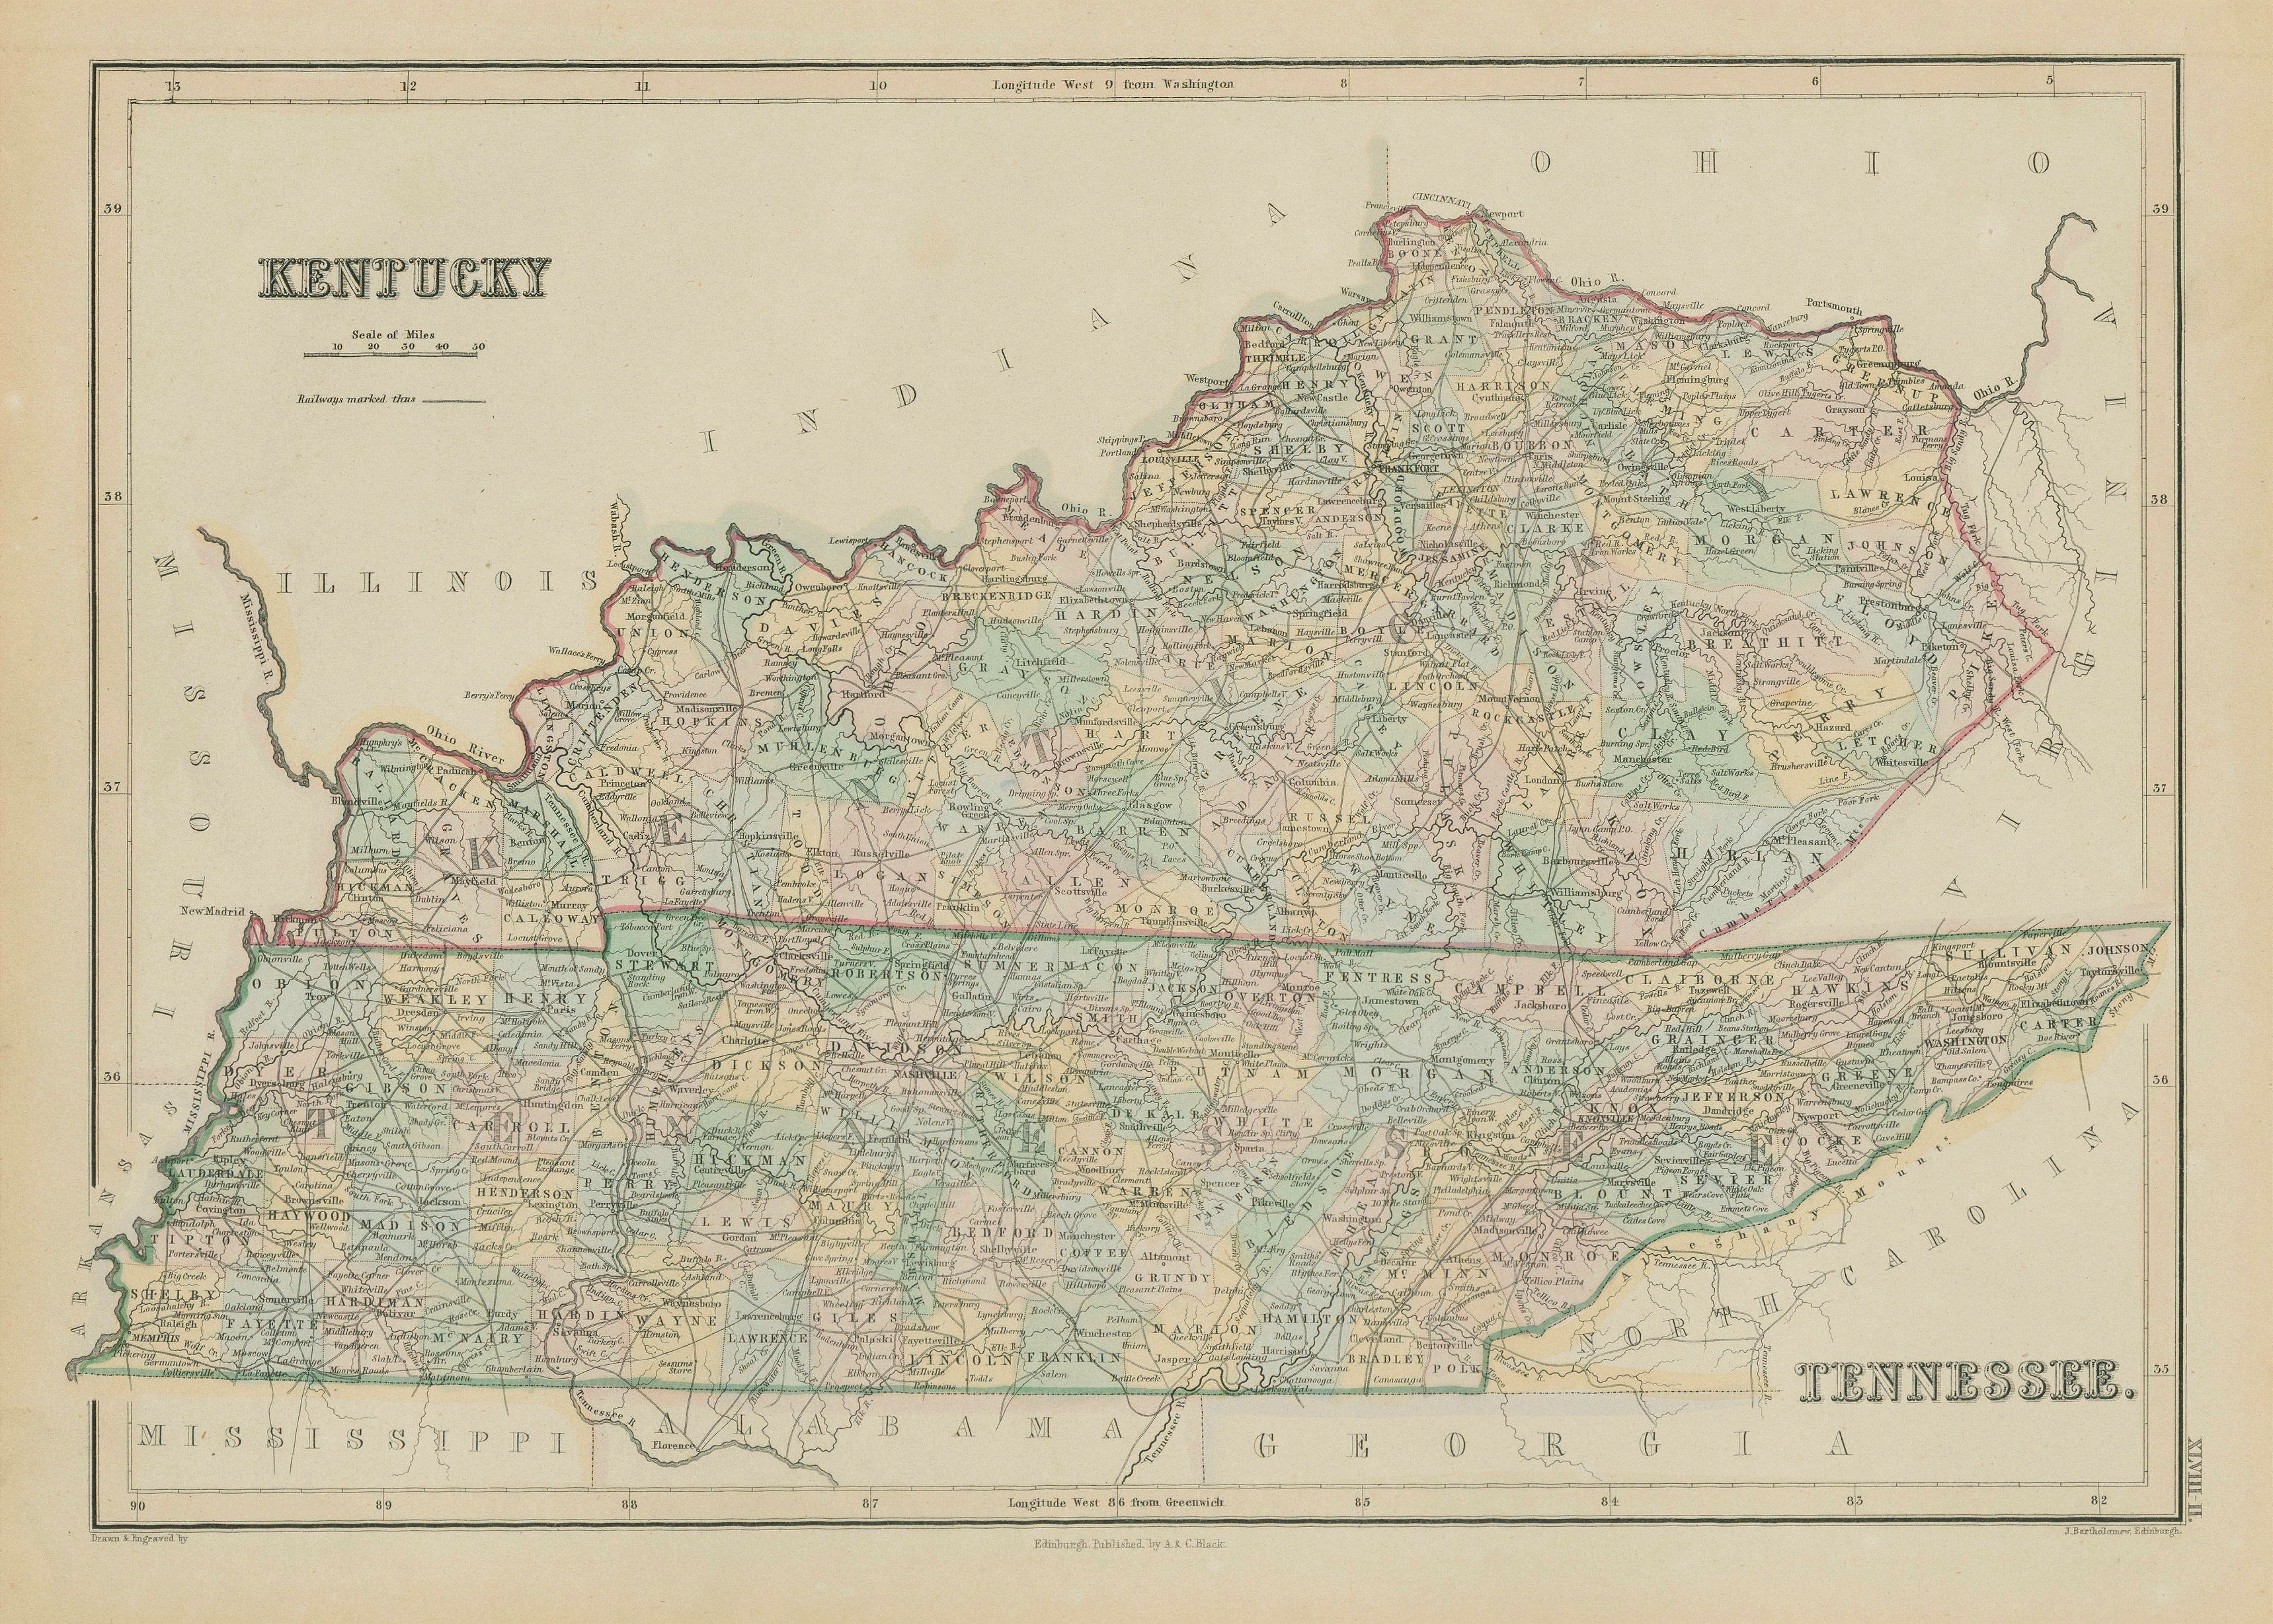 Associate Product Kentucky & Tennessee state map showing counties. JOHN BARTHOLOMEW 1856 old